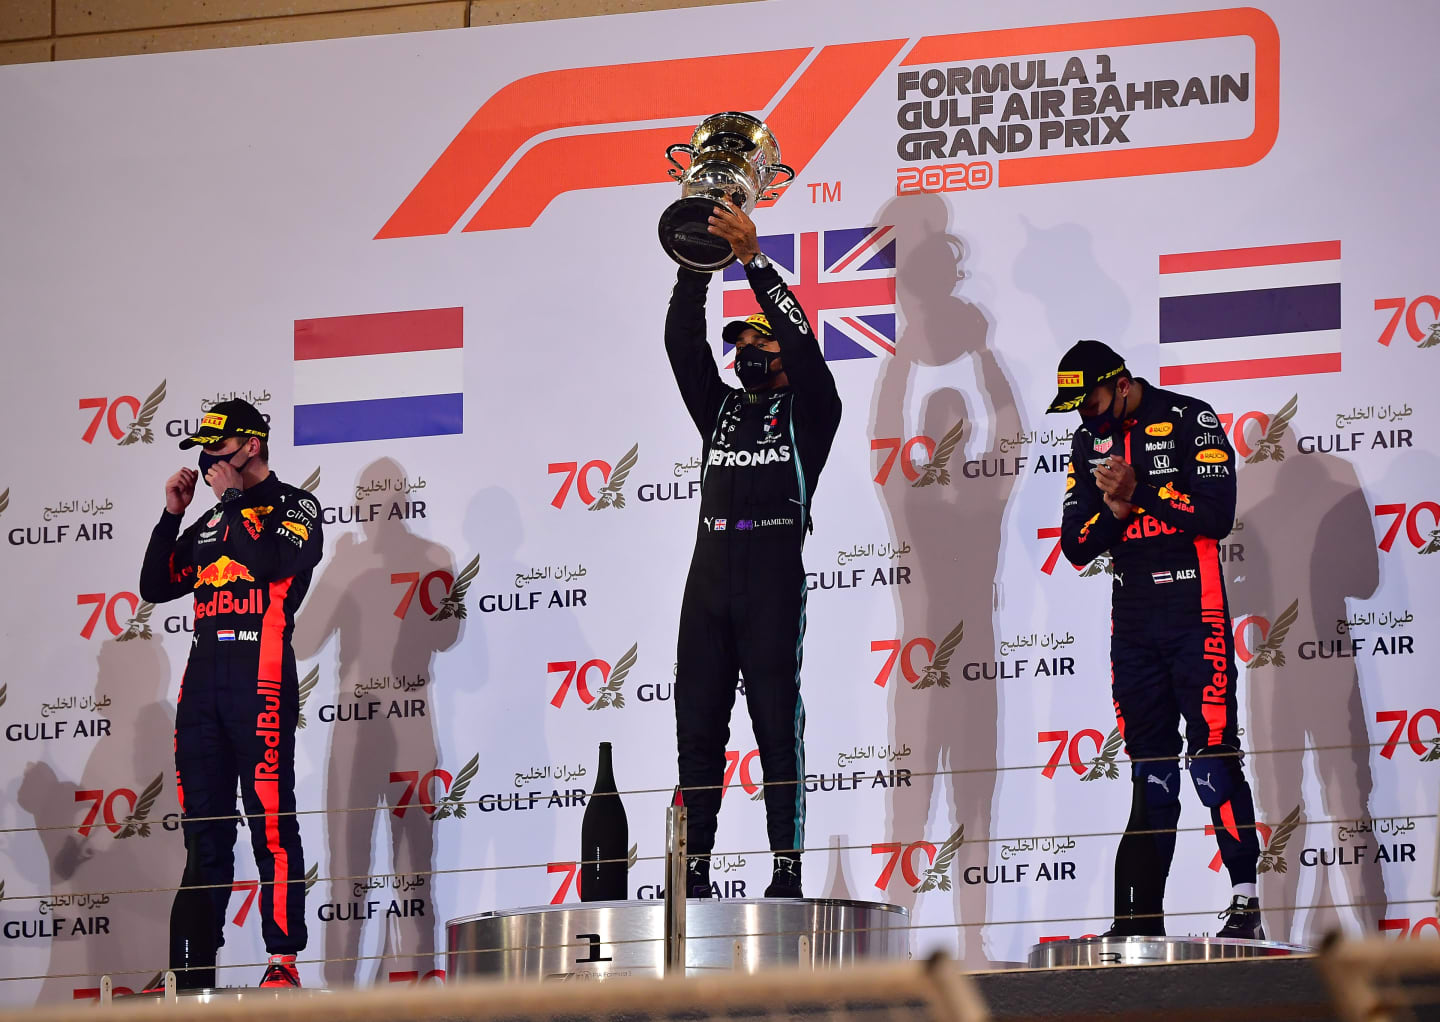 BAHRAIN, BAHRAIN - NOVEMBER 29: Race winner Lewis Hamilton of Great Britain and Mercedes GP, second placed Max Verstappen of Netherlands and Red Bull Racing and third placed Alexander Albon of Thailand and Red Bull Racing celebrate on the podium during the F1 Grand Prix of Bahrain at Bahrain International Circuit on November 29, 2020 in Bahrain, Bahrain. (Photo by Giuseppe Cacace - Pool/Getty Images)